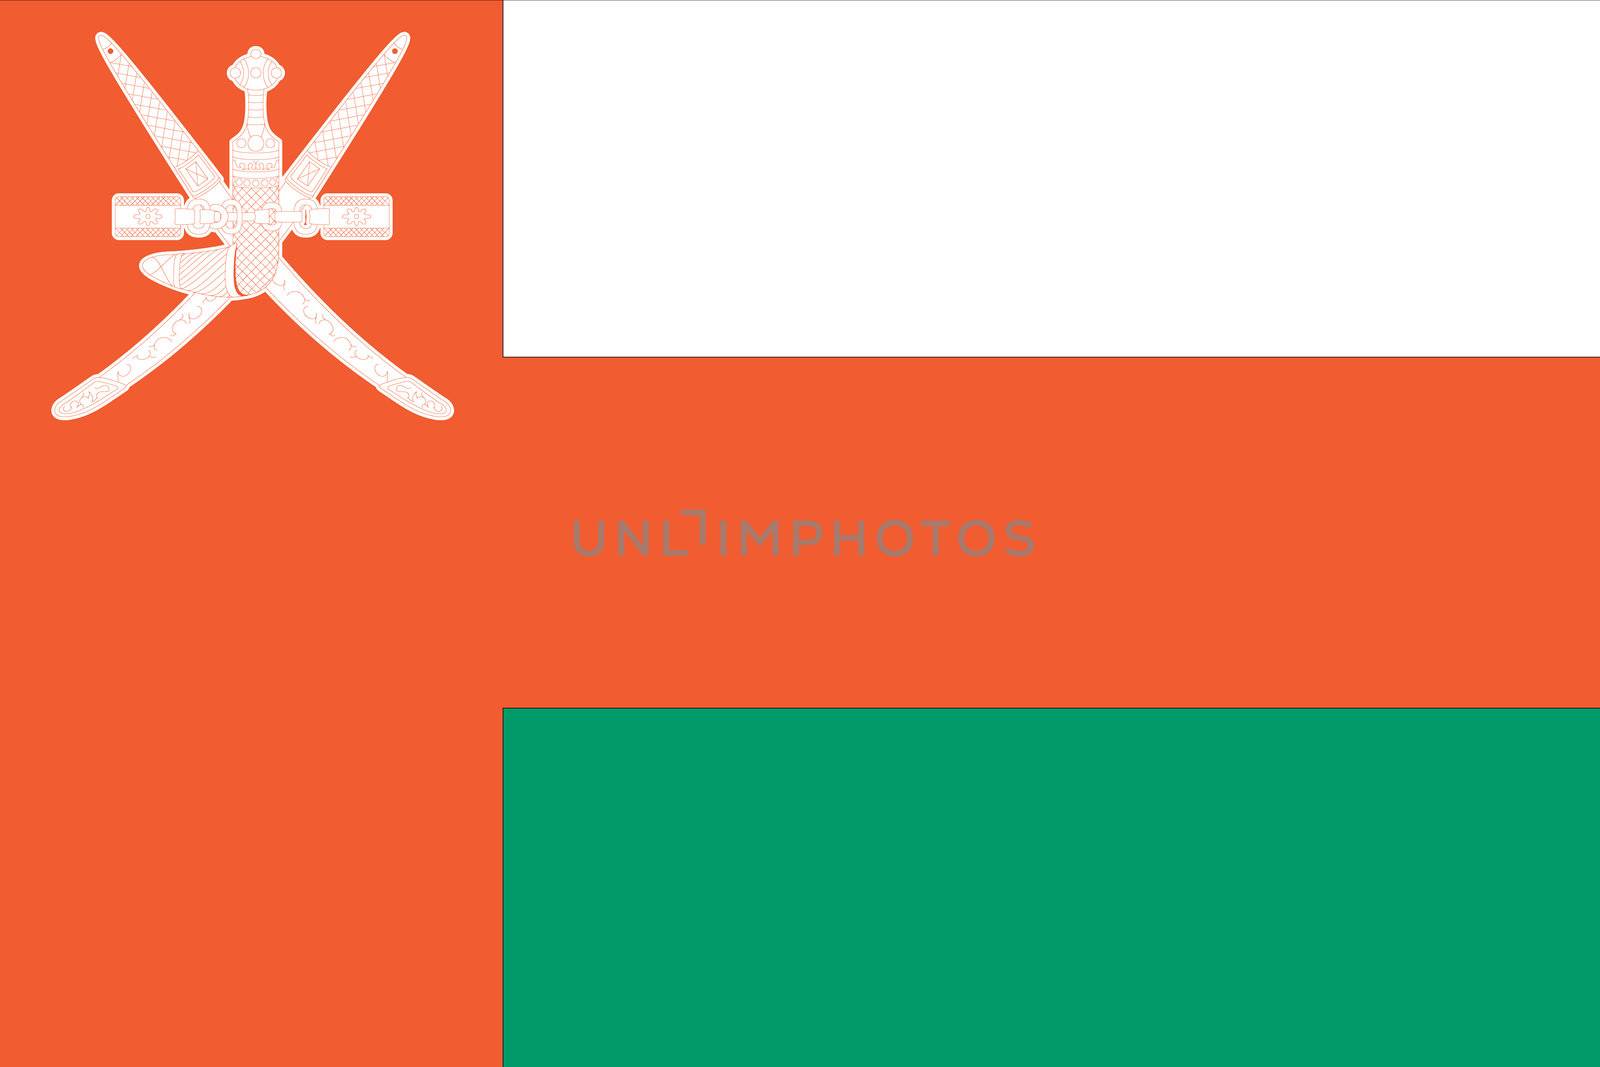 An Illustrated Drawing of the flag of Oman